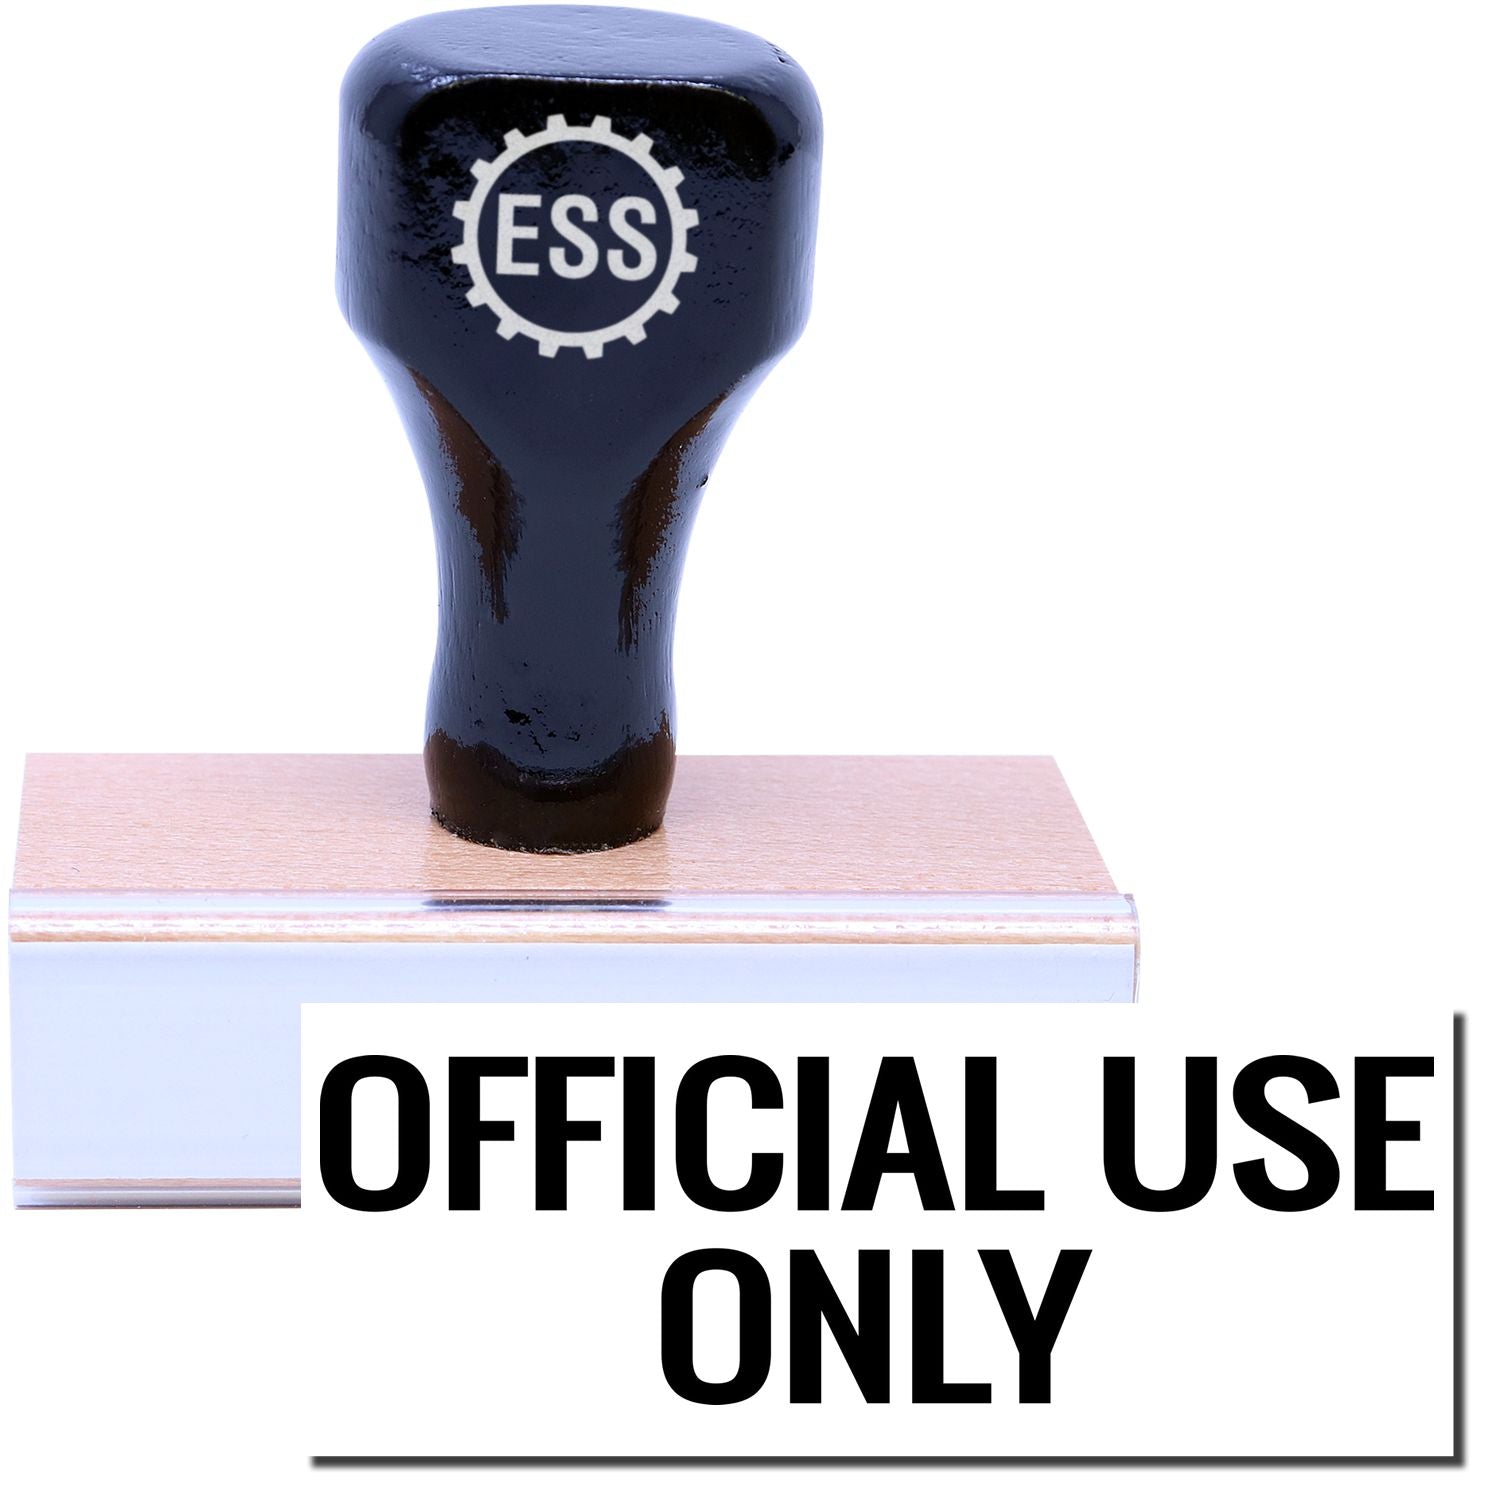 A stock office rubber stamp with a stamped image showing how the text "OFFICIAL USE ONLY" in a large font is displayed after stamping.